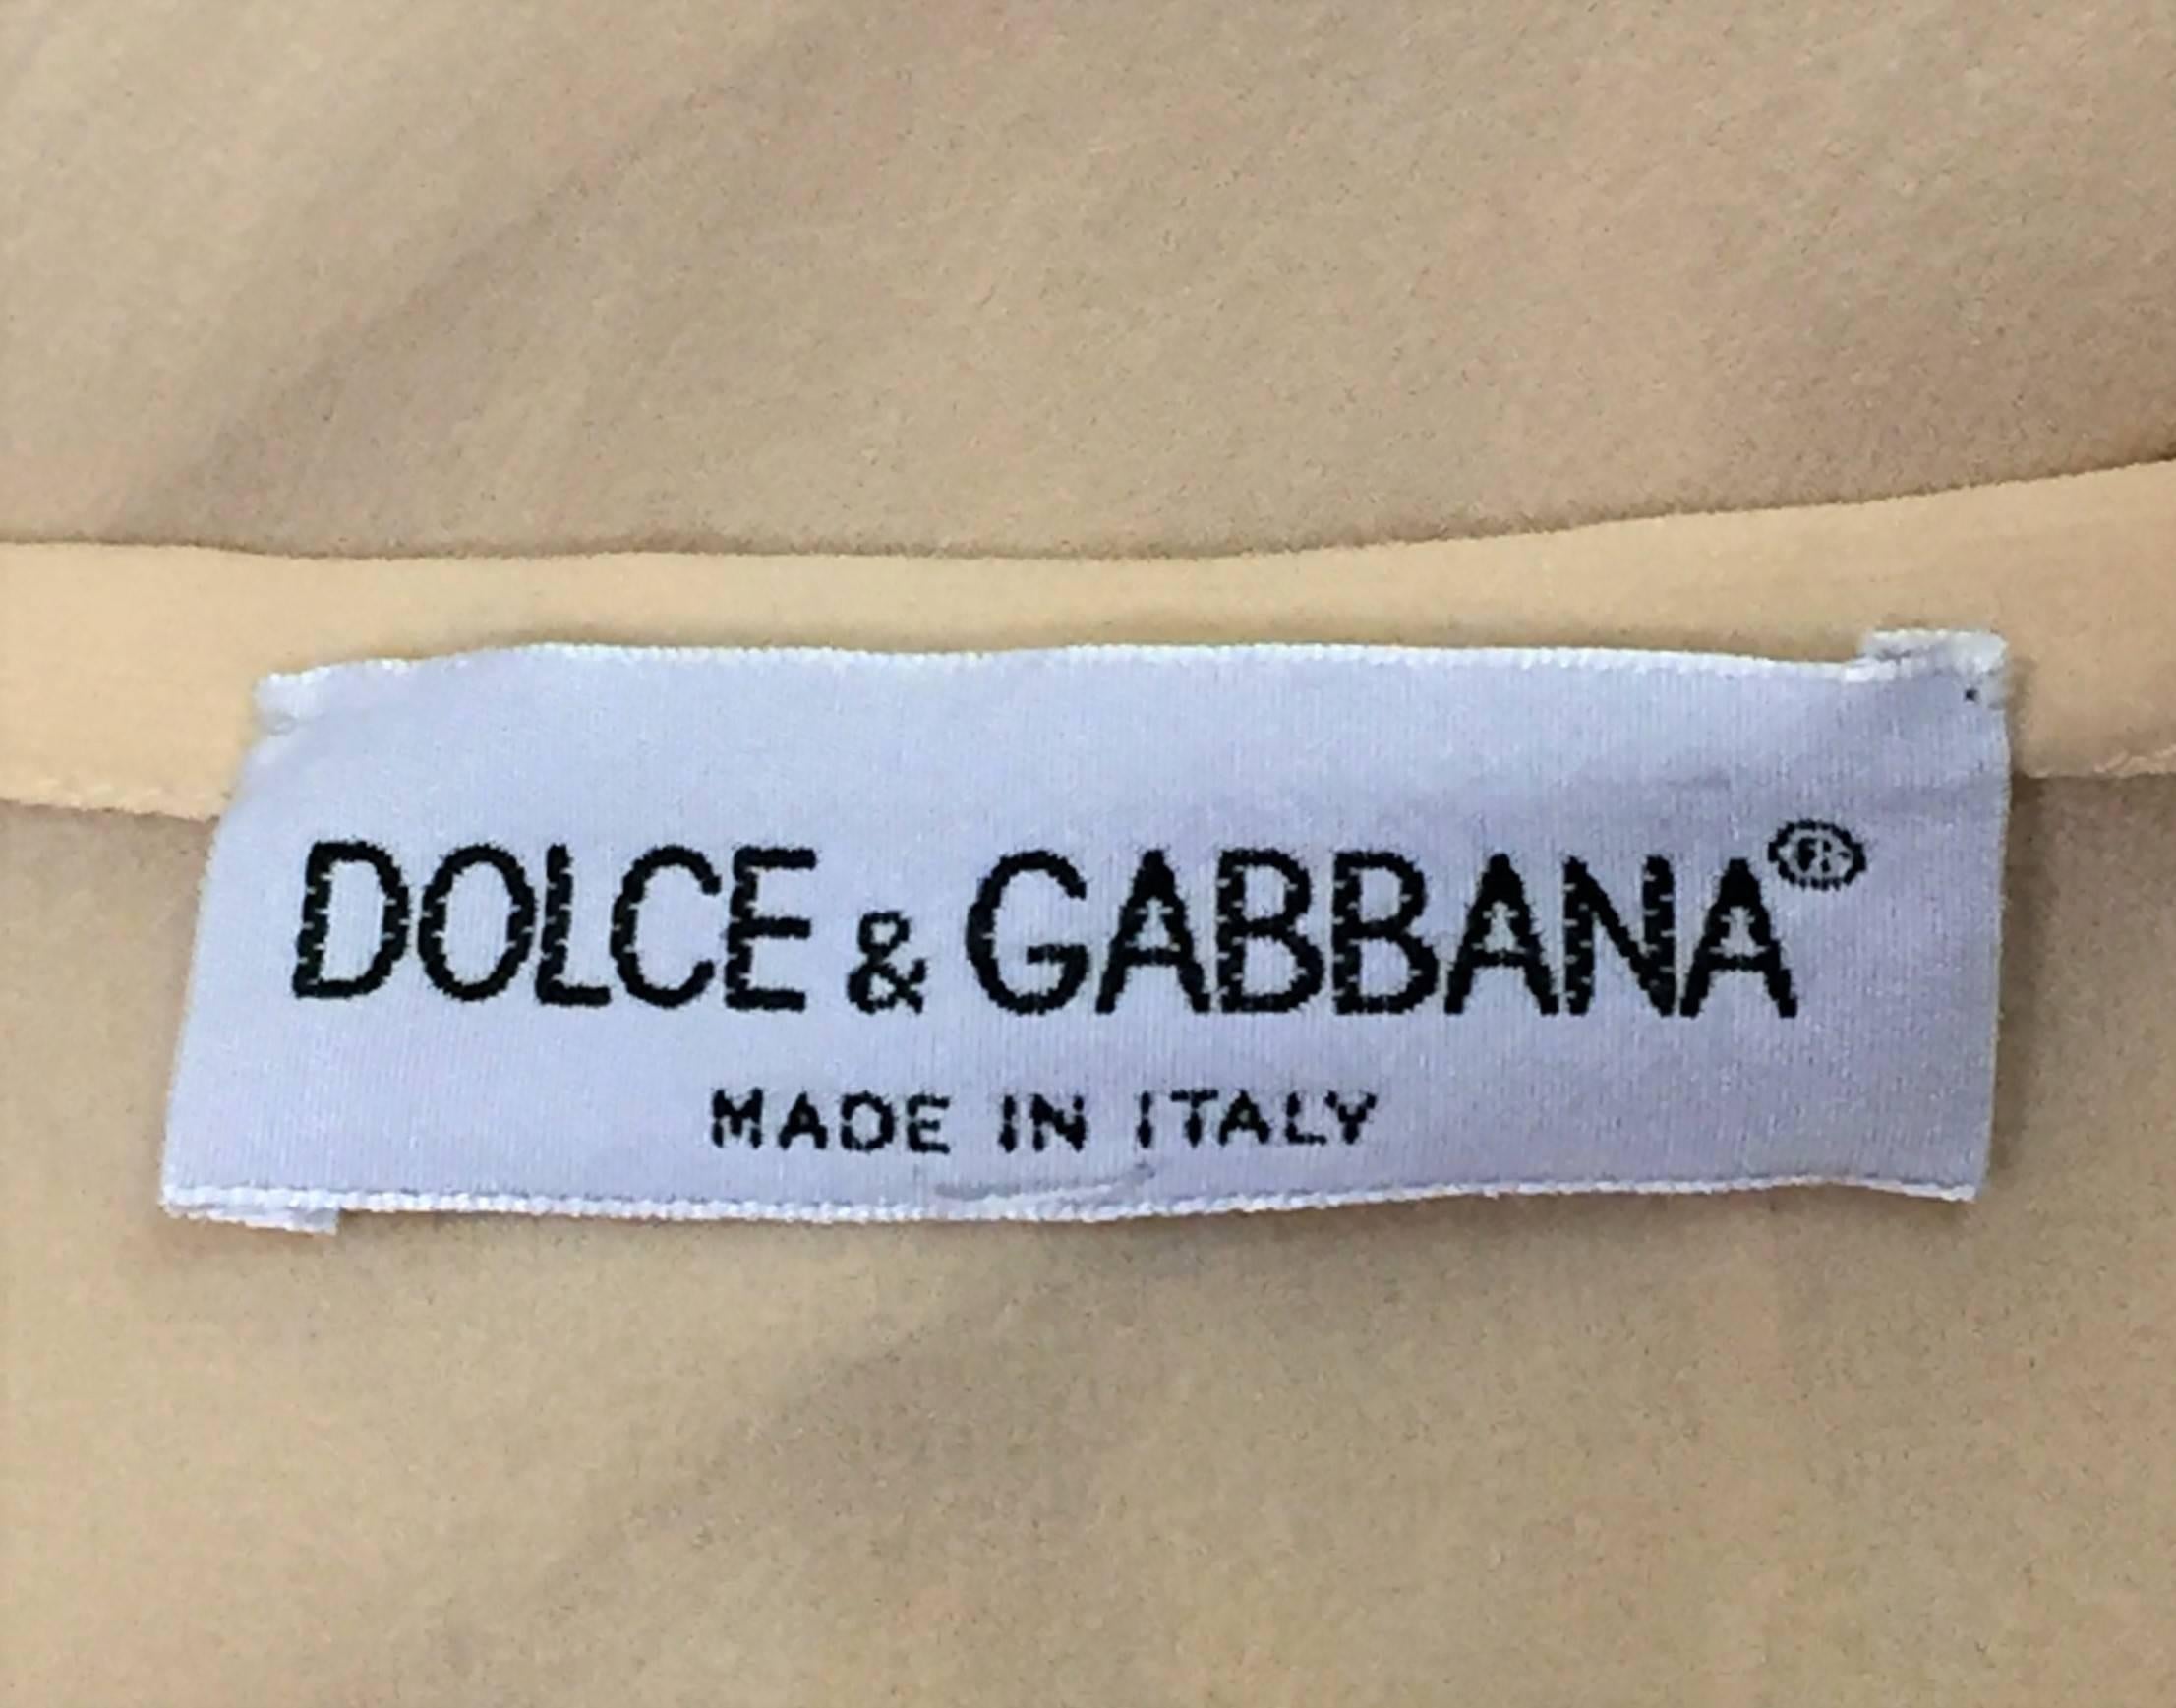 DESIGNER: S/S 1997 Dolce & Gabbana

Please contact for more information and/or photos.

CONDITION: Excellent

MATERIAL: 100% silk

COUNTRY MADE: Italy

SIZE: 40- runs small

MEASUREMENTS; provided as a courtesy only- not a guarantee of fit: 

Waist: